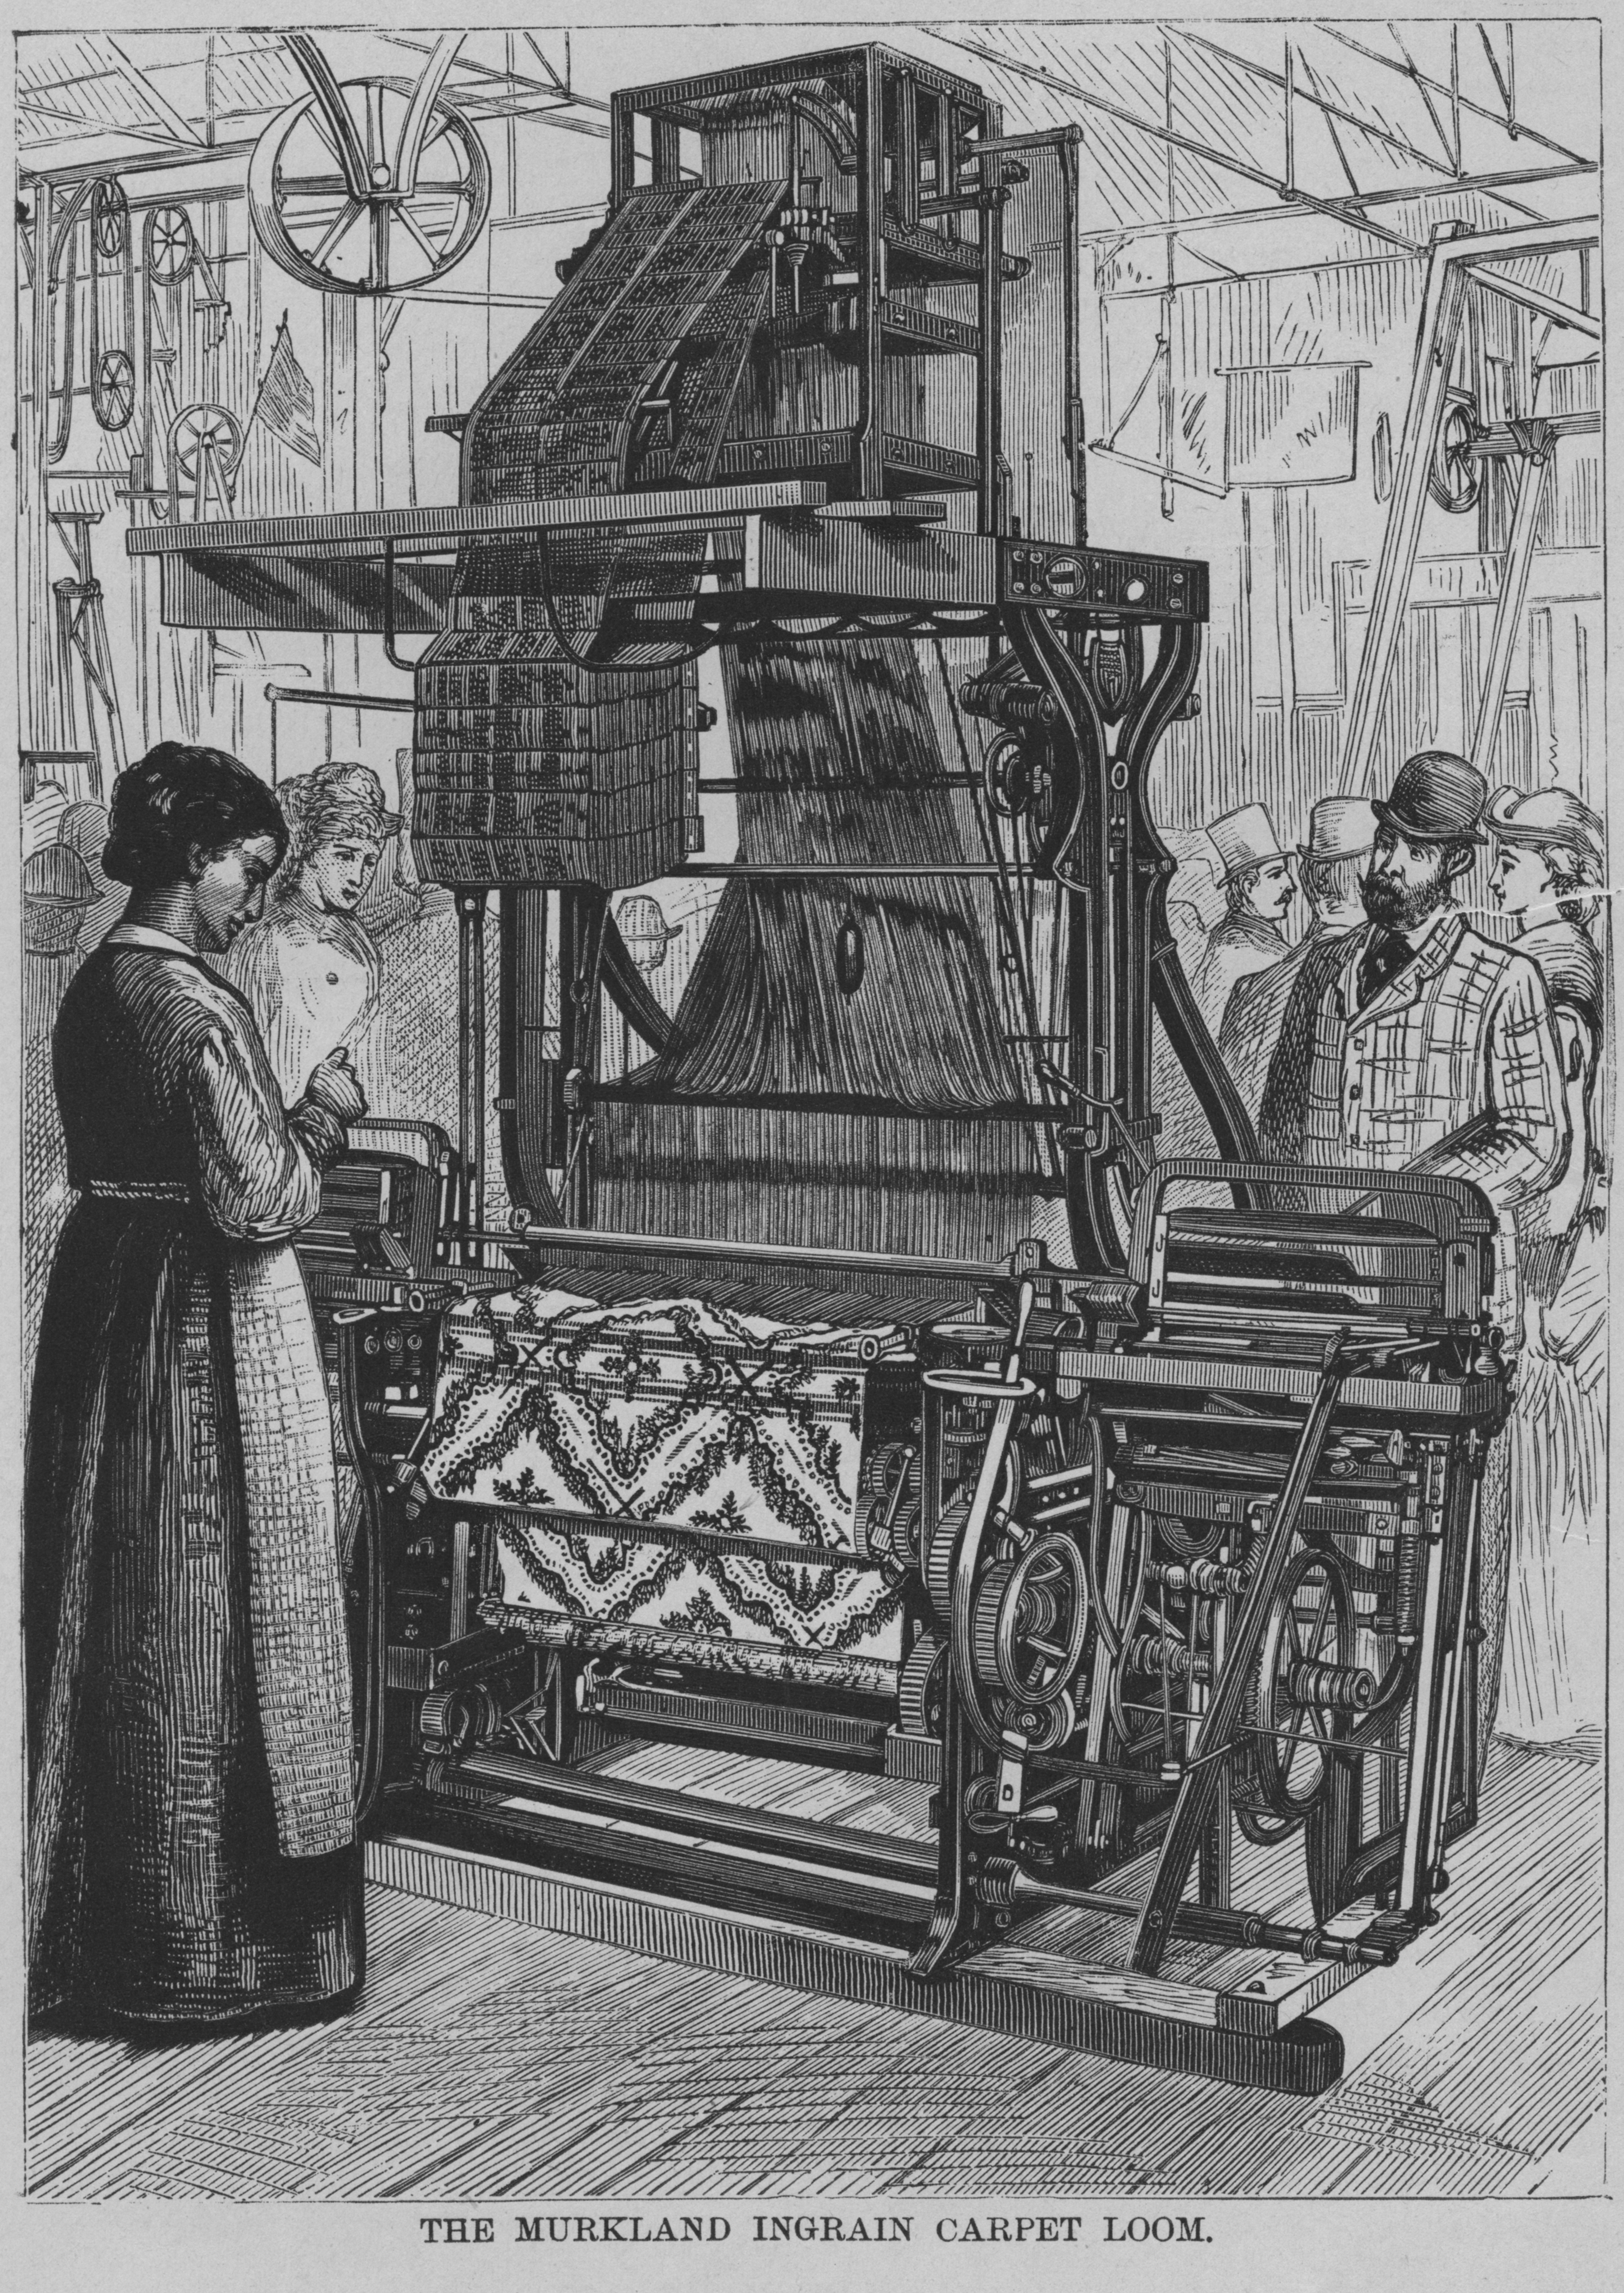 Illustration of a Murkland Ingrain carpet loom at work circa 1876. (Kean Collection—Getty Images)